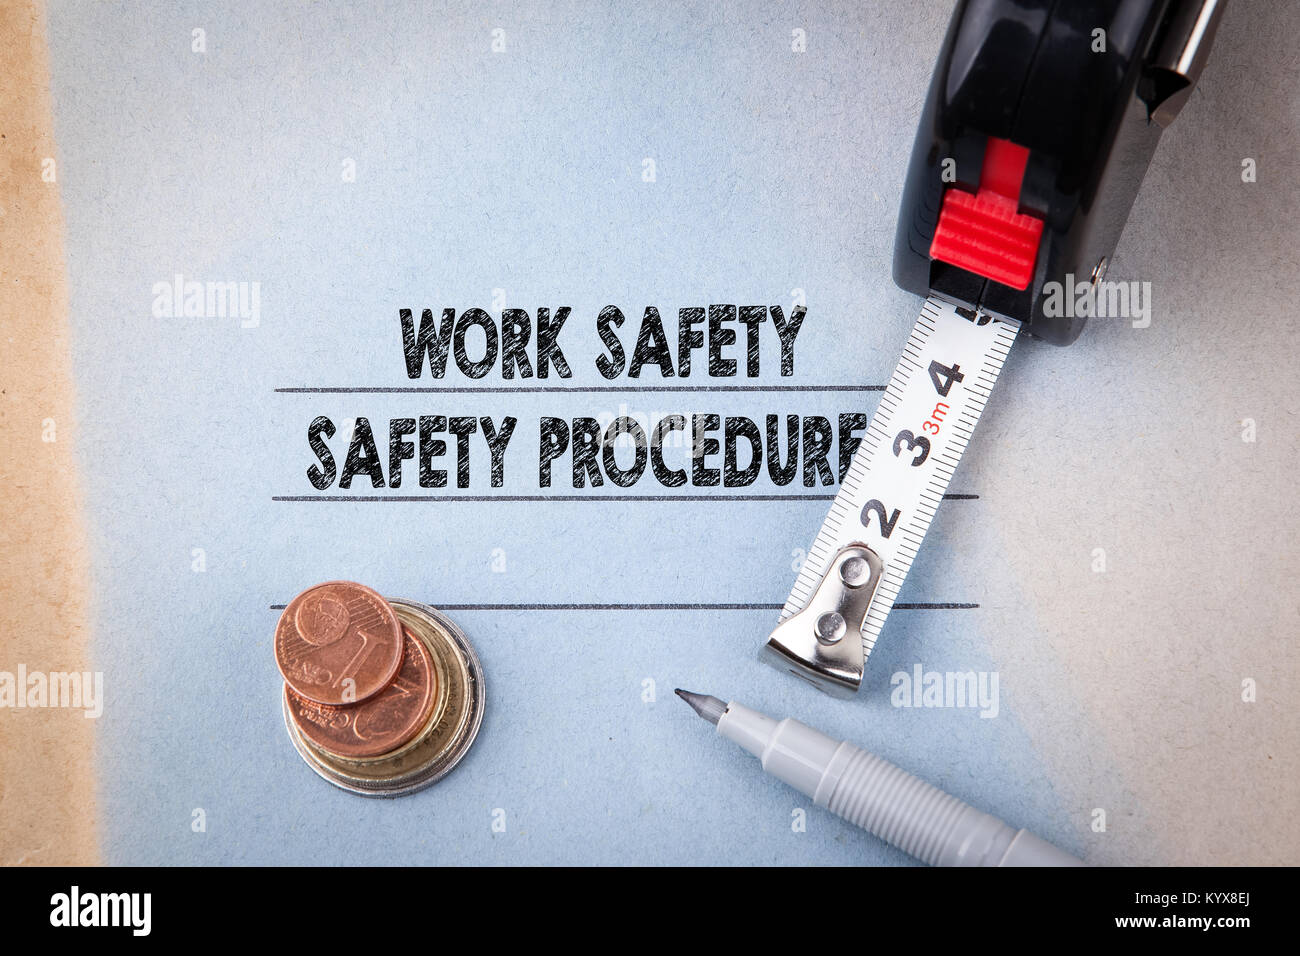 Work Safety and Safety Procedures. hazards, protections, health and regulations Stock Photo